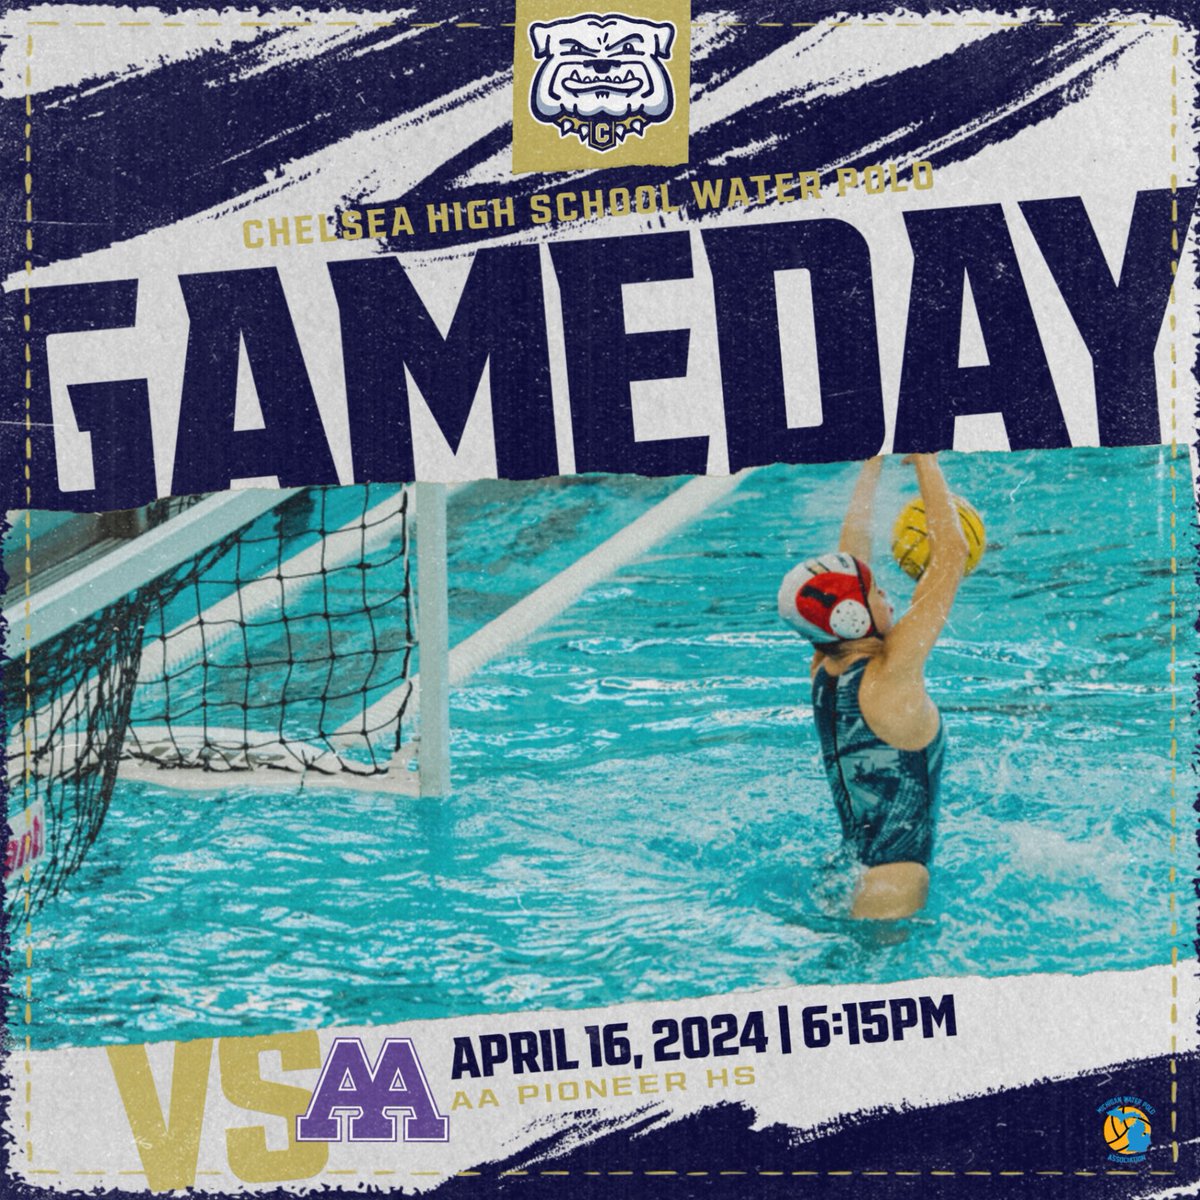 The long road trip continues tonight for another D4 showdown against the Pioneers! Help cheer our #7 ranked #RoadDawgs to 2-0 in district play tonight! 

🆚: @phswomenswaterpolo 
📍: Ann Arbor, MI
🏟️: Hill Pool
⌚️: Varsity 6:15pm // JV 7:15pm
🎟️: $6 via GoFan

#Road2C4nham 🤽‍♀️🐾